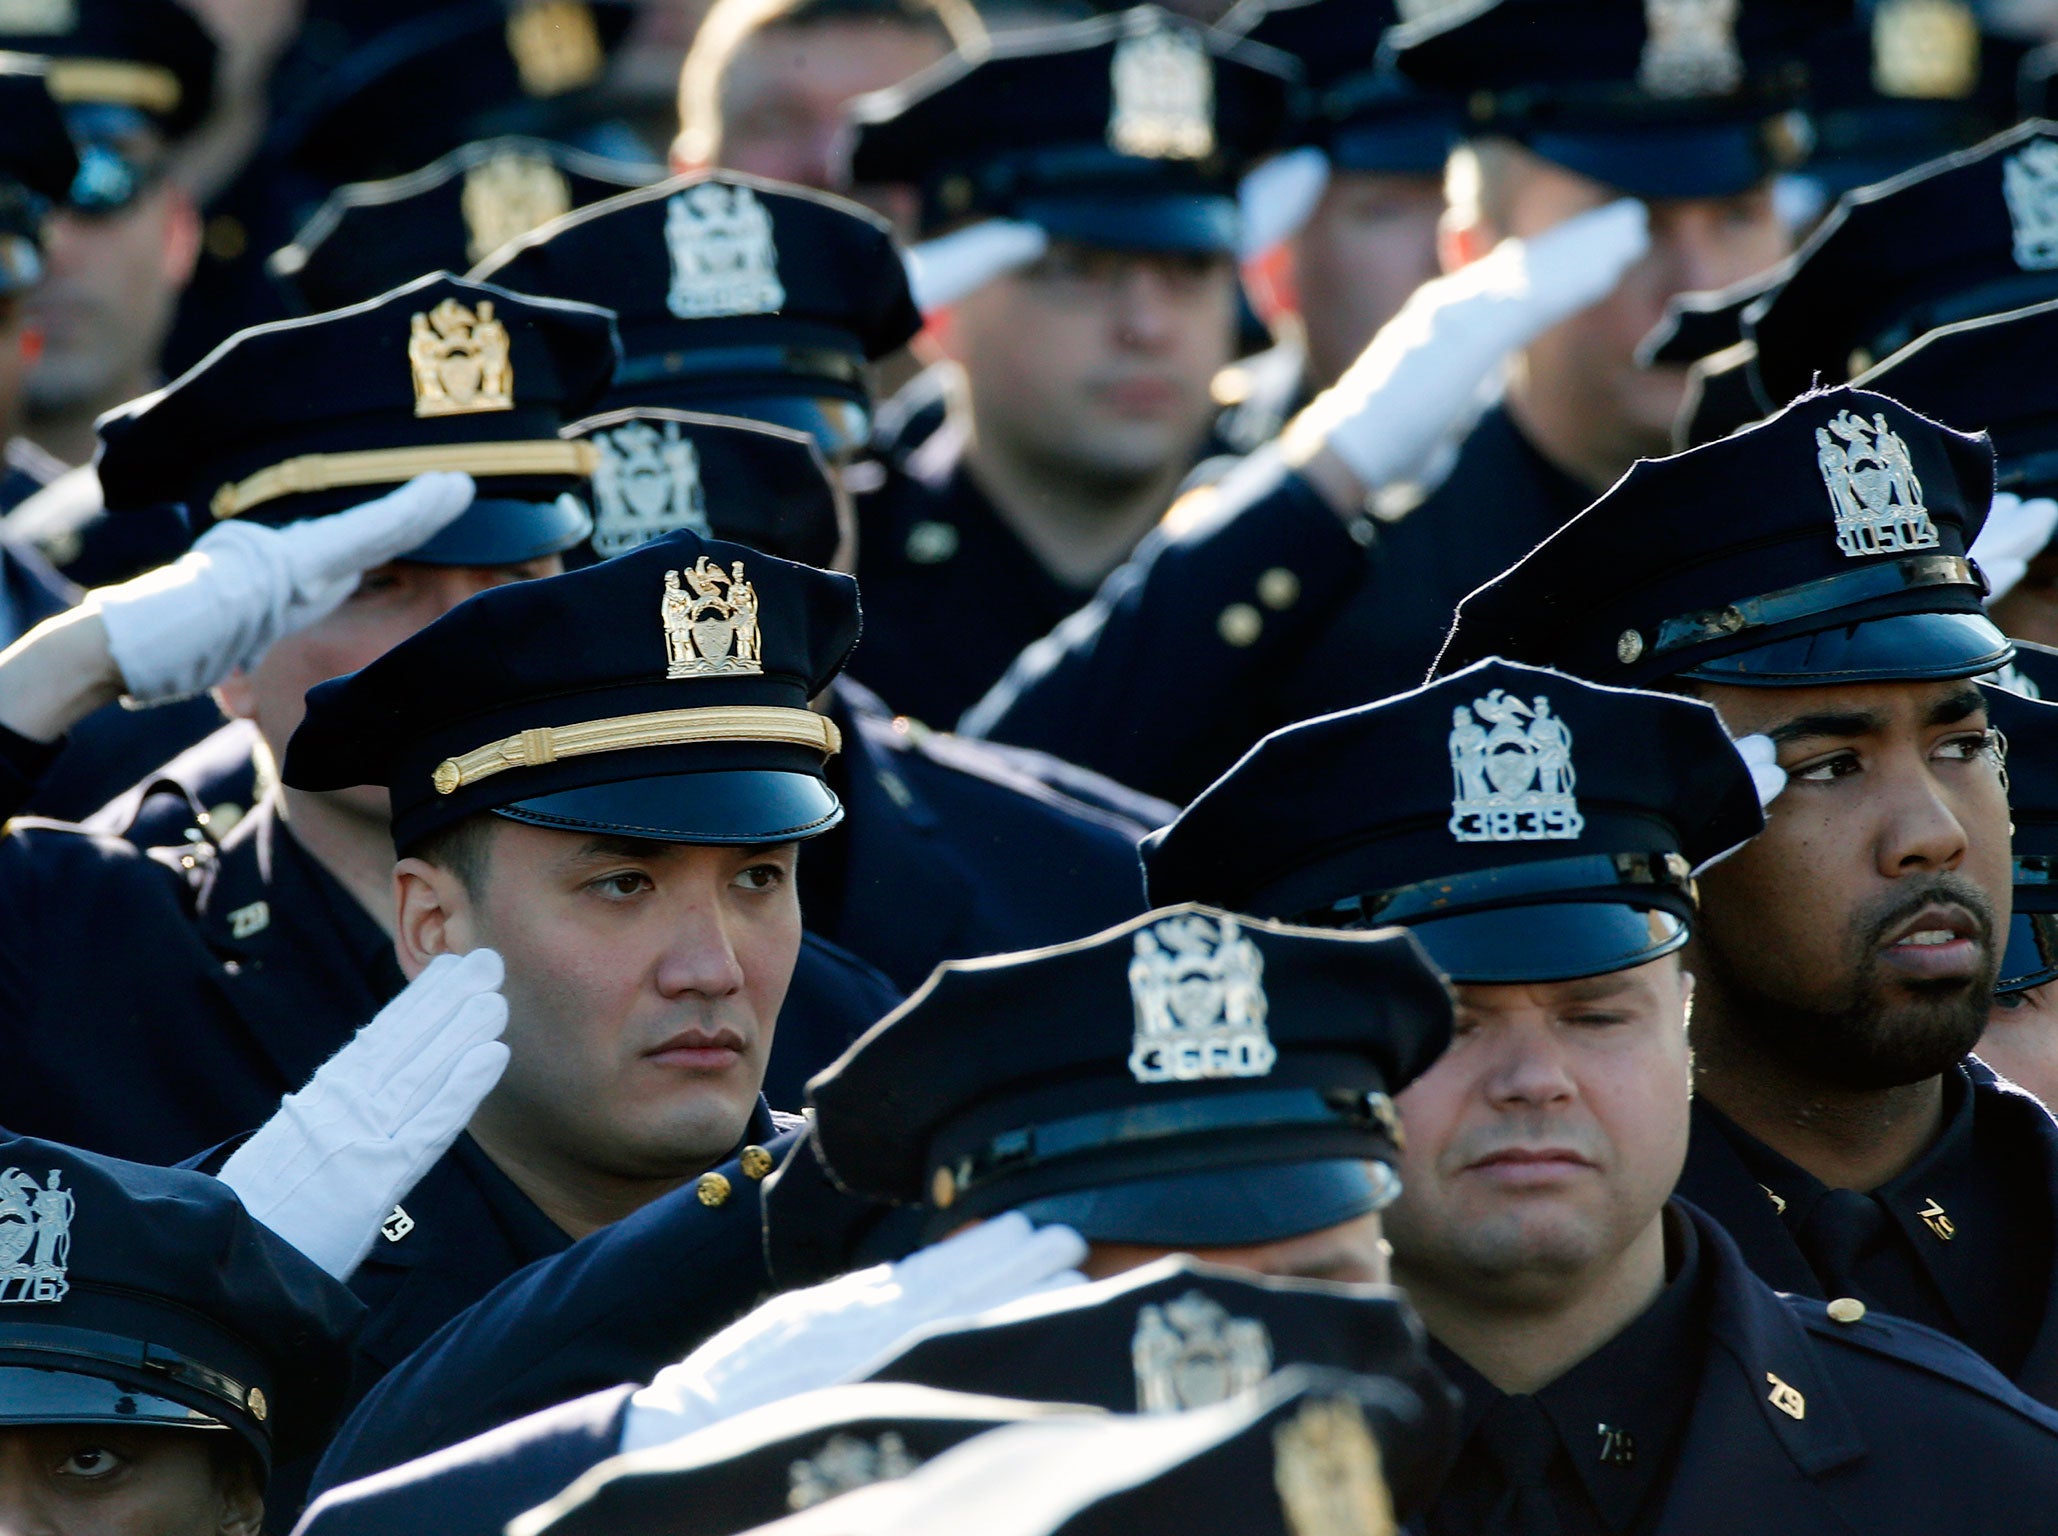 NYPD police salute during national anthem